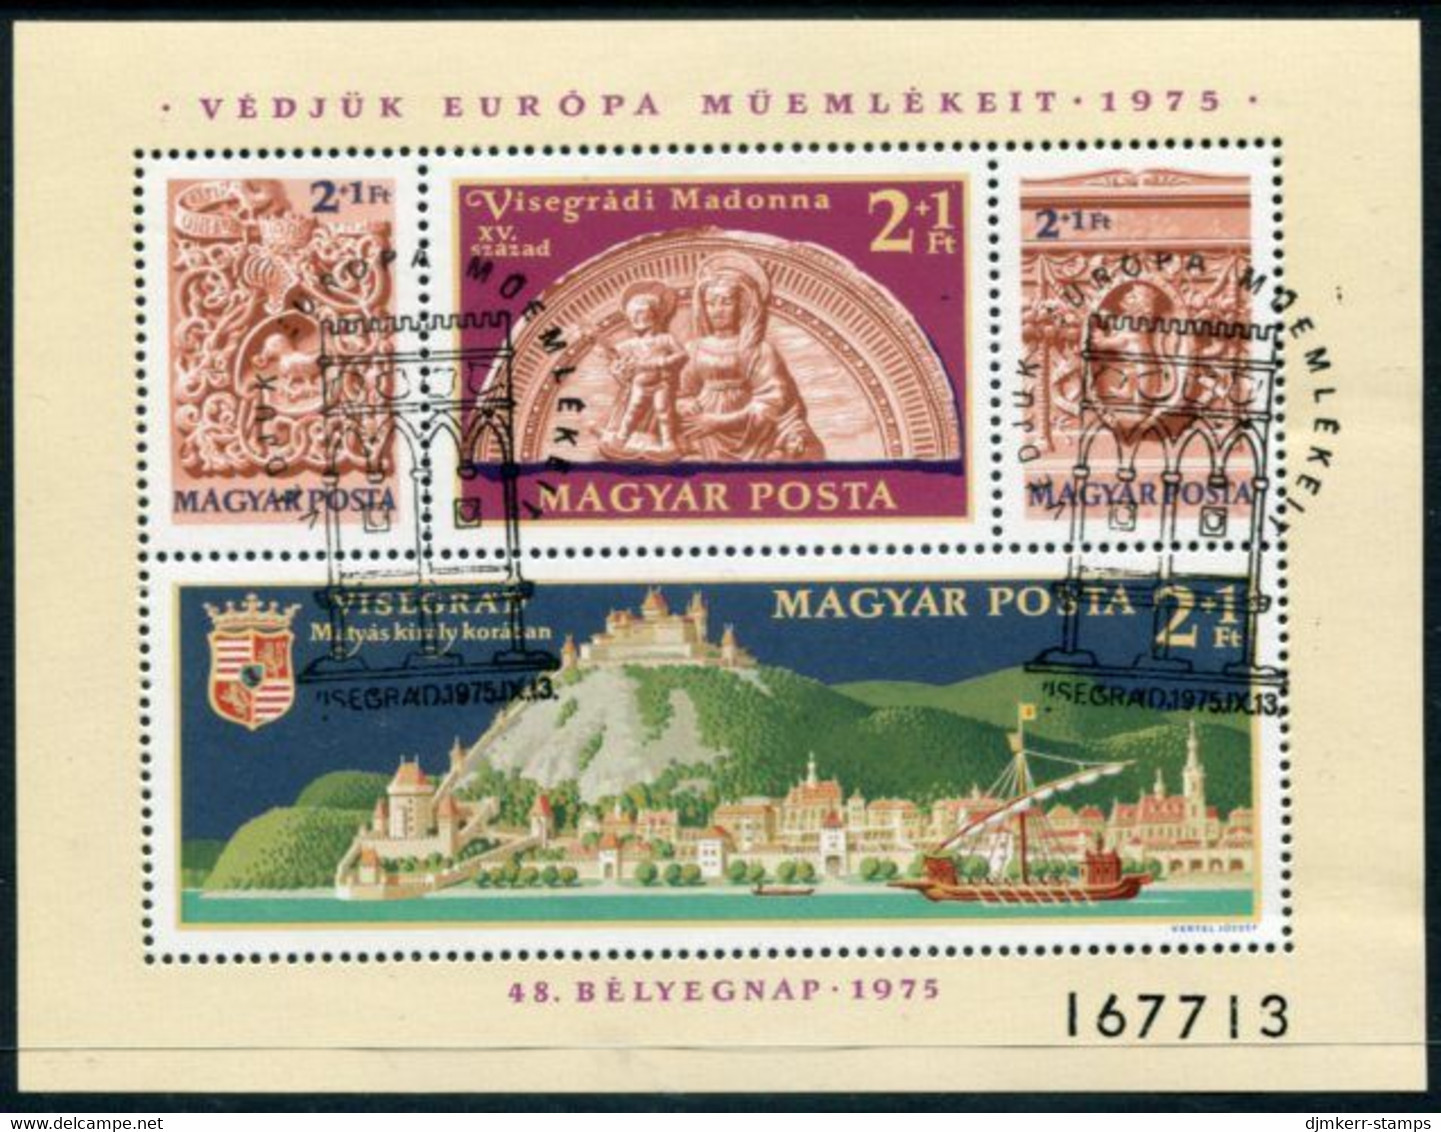 HUNGARY 1975 Stamp Day: Protection Of Monuments Block Used..  Michel Block 115 - Hojas Bloque